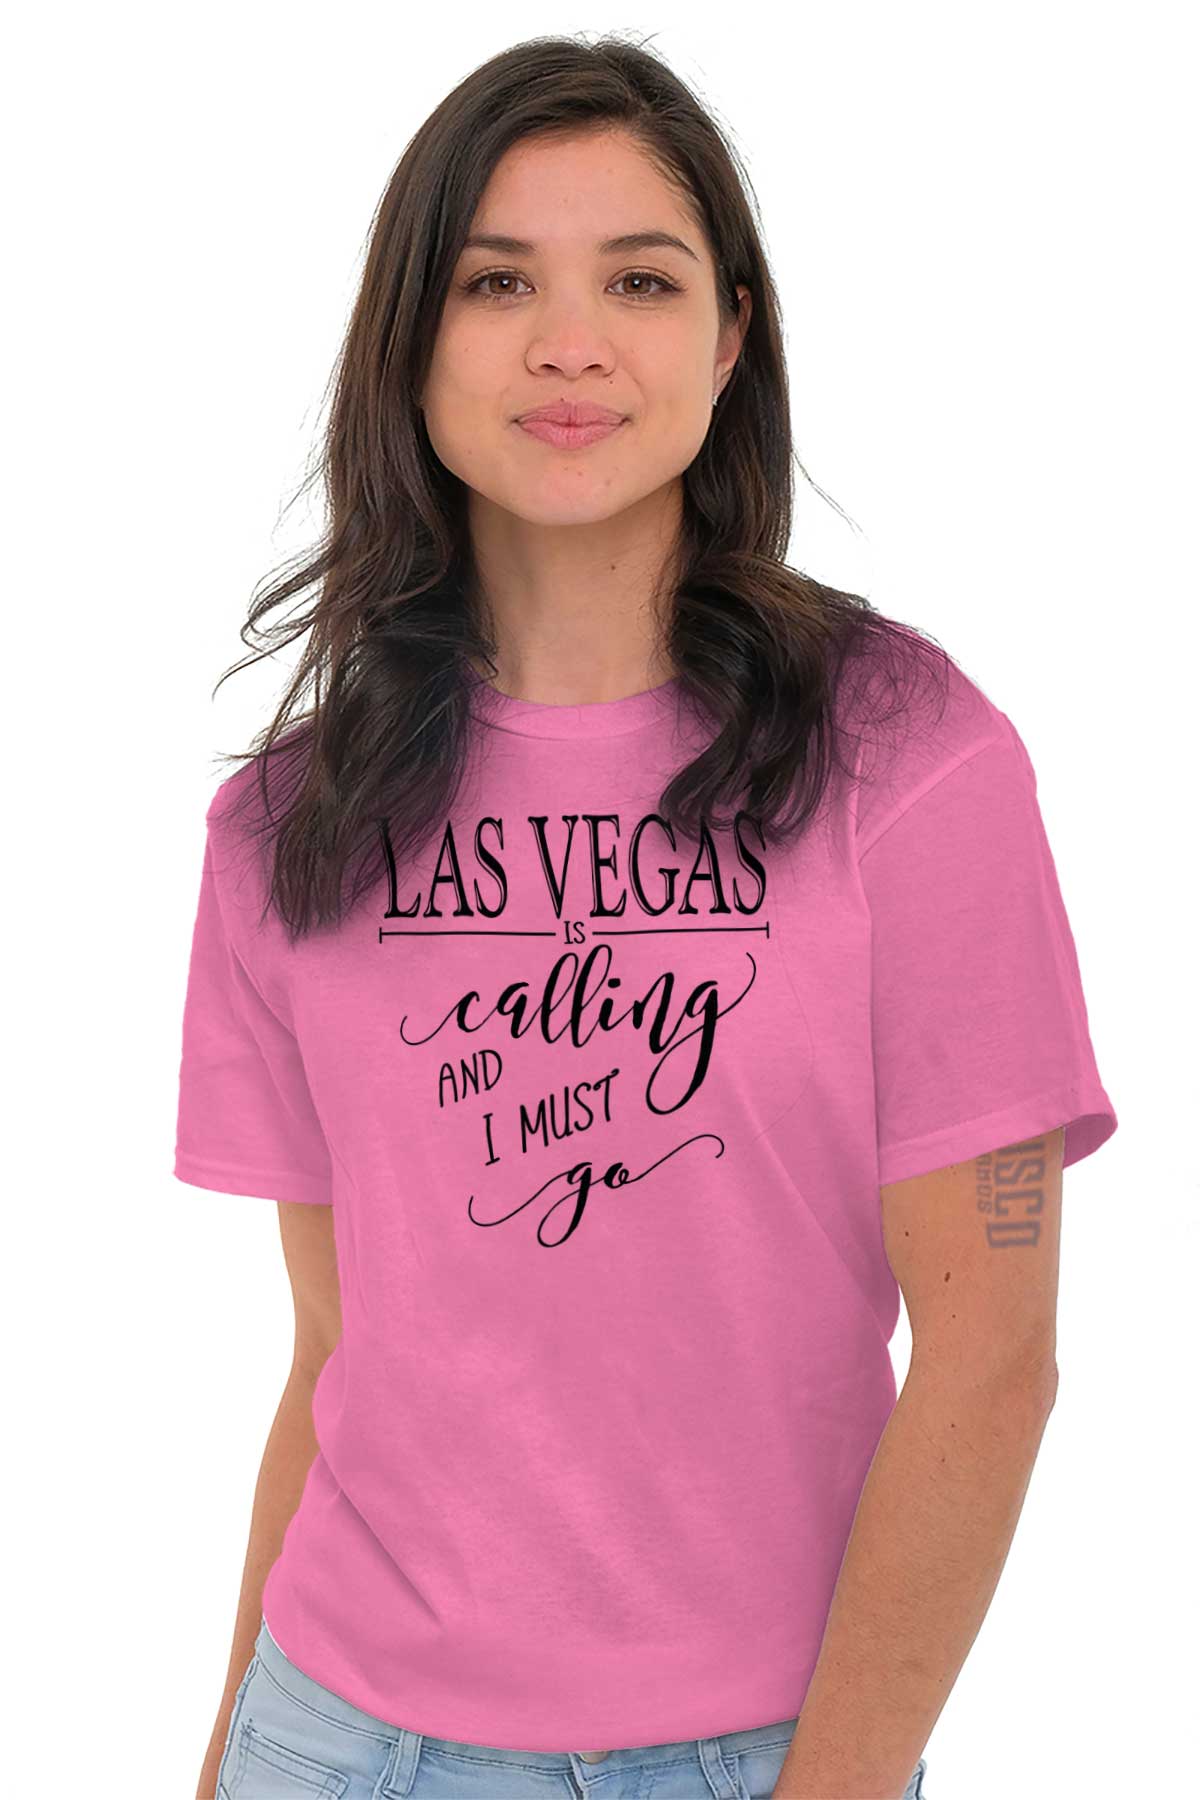 Las Vegas is Calling I Must Go Women's Graphic T Shirt Tees Brisco Brands M - image 4 of 6